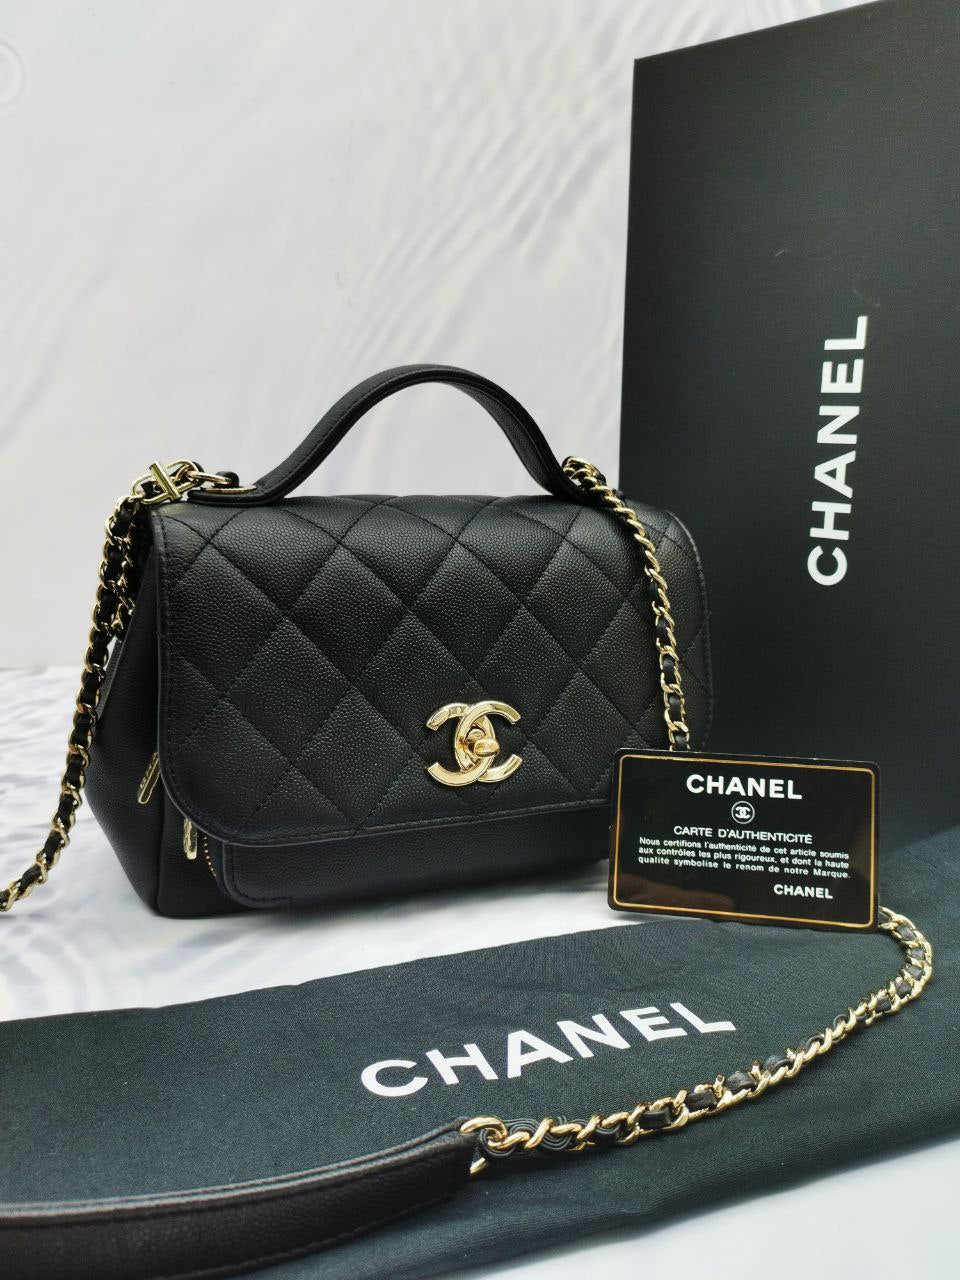 Chanel Small Business Affinity Bag  -full Set-